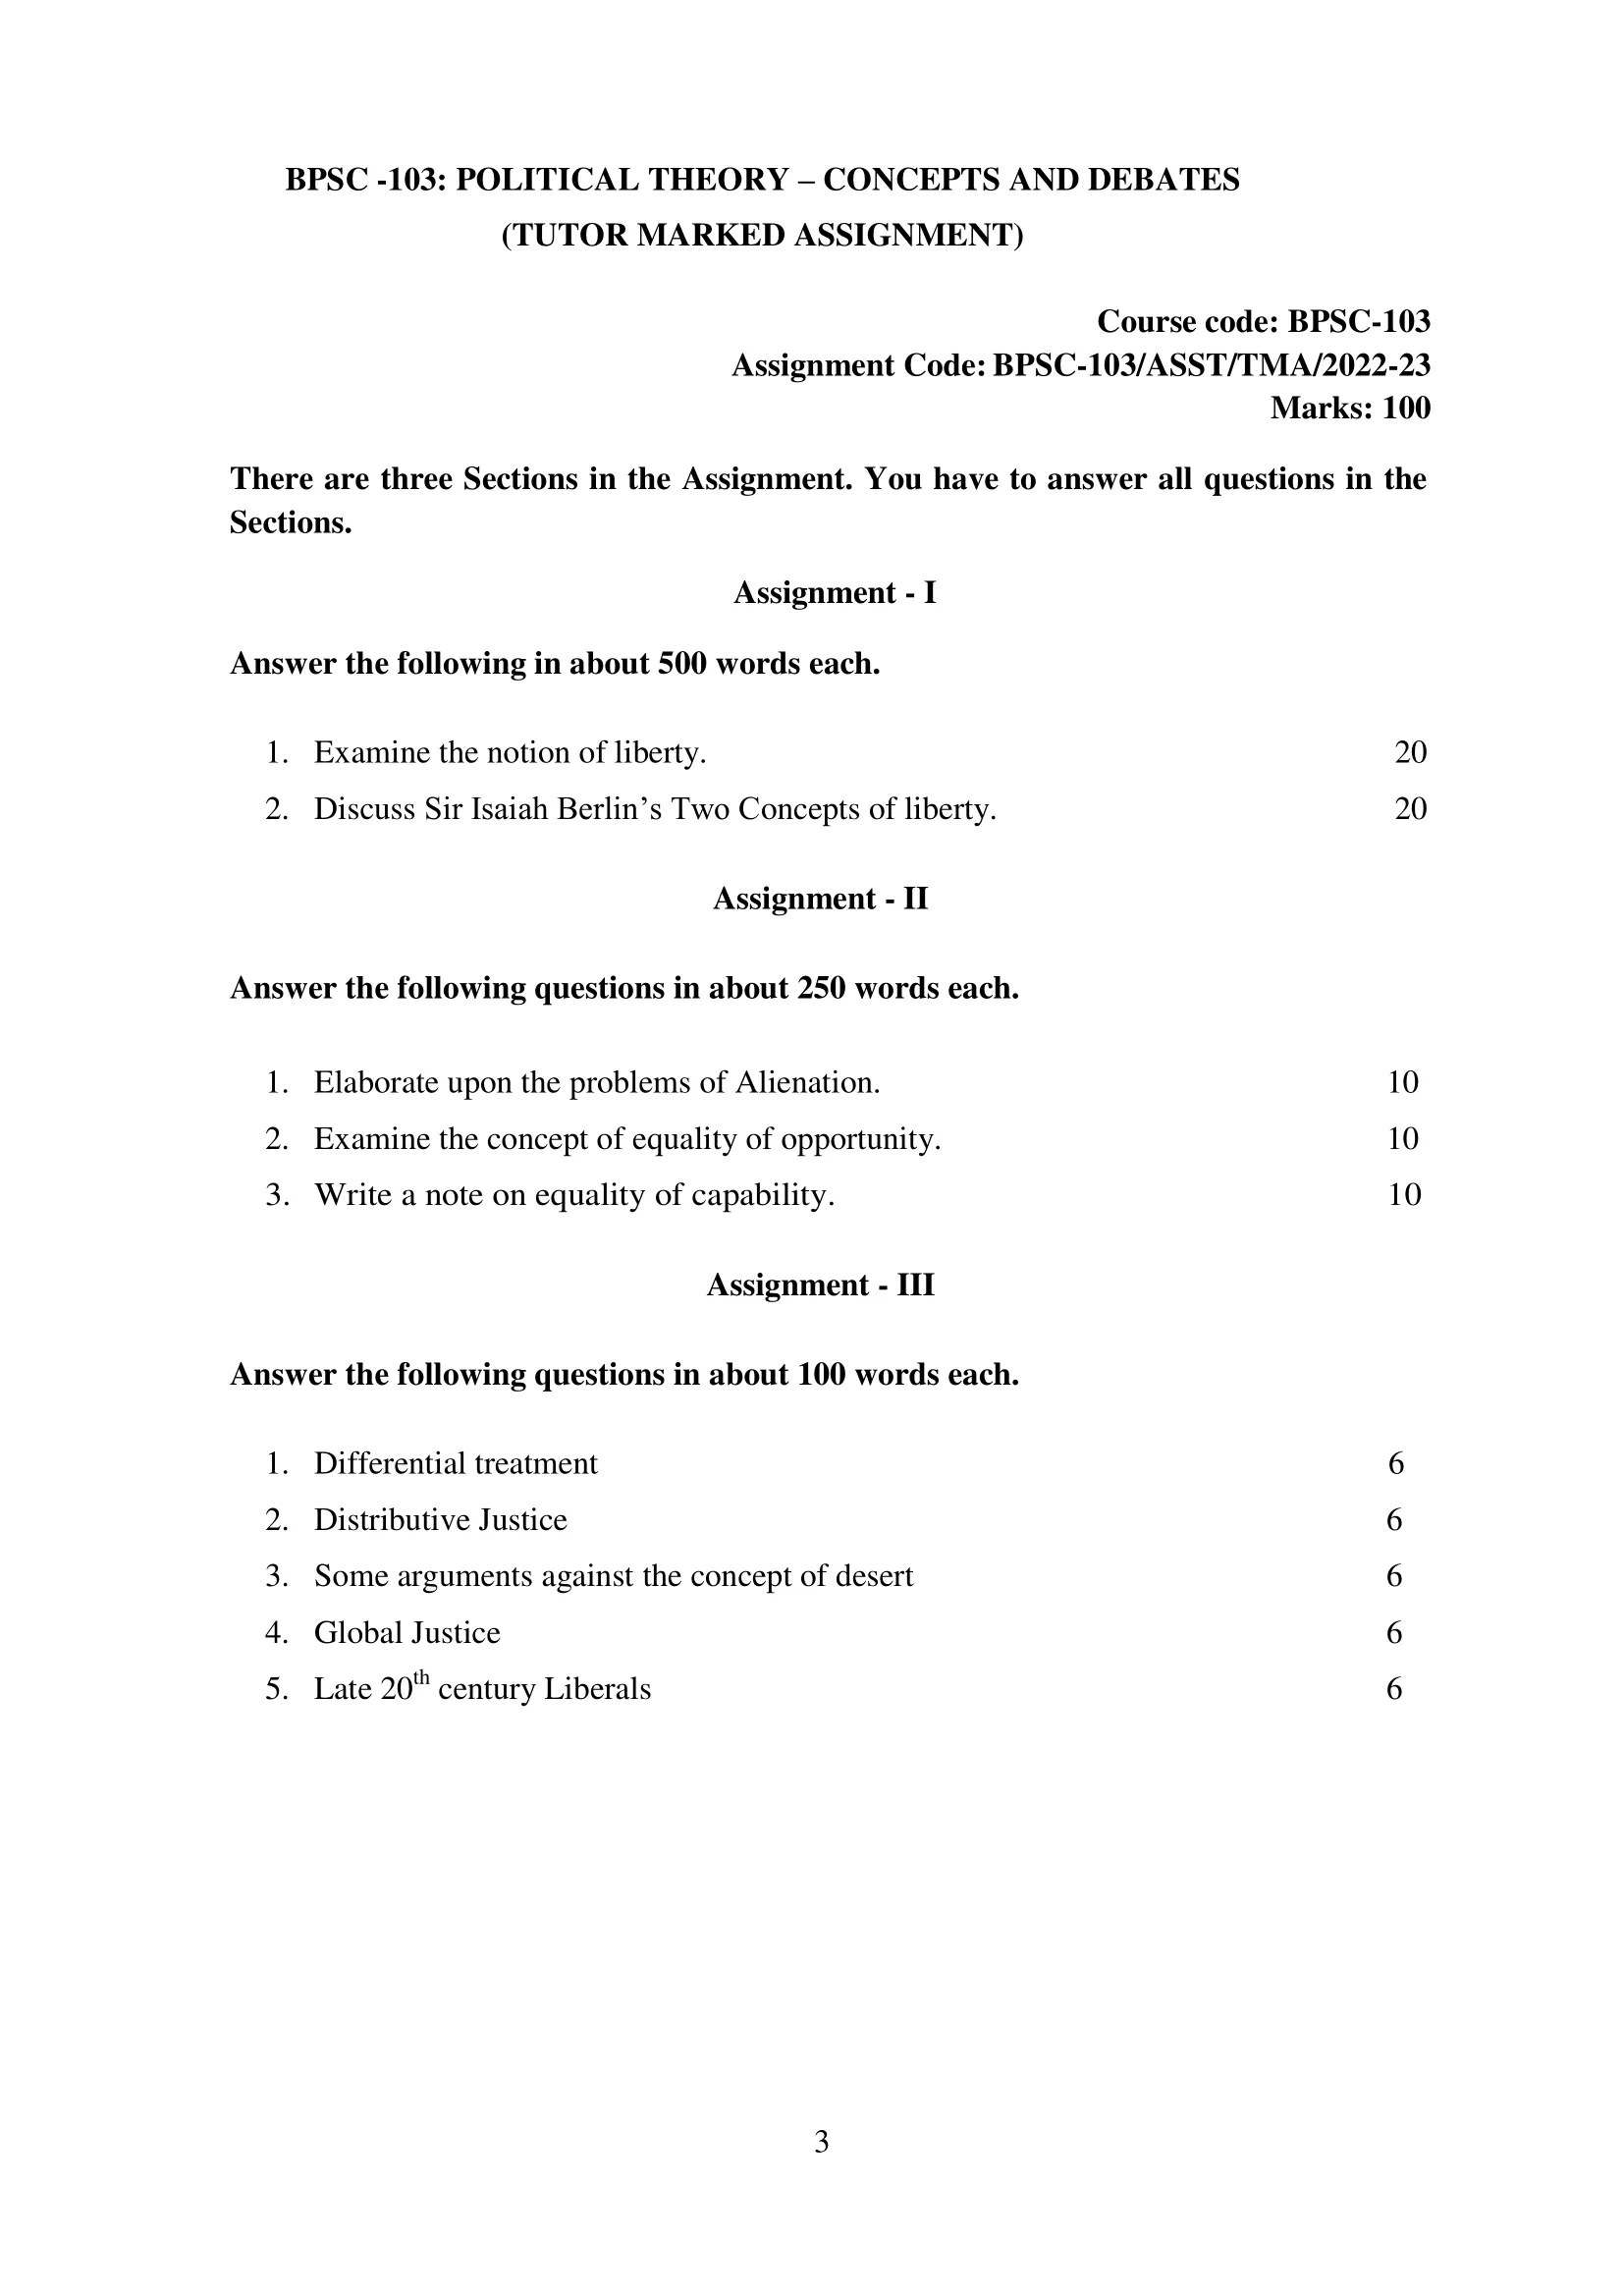 BPSC-103 IGNOU BAG Solved Assignment-POLITICAL THEORY – CONCEPTS AND DEBATES